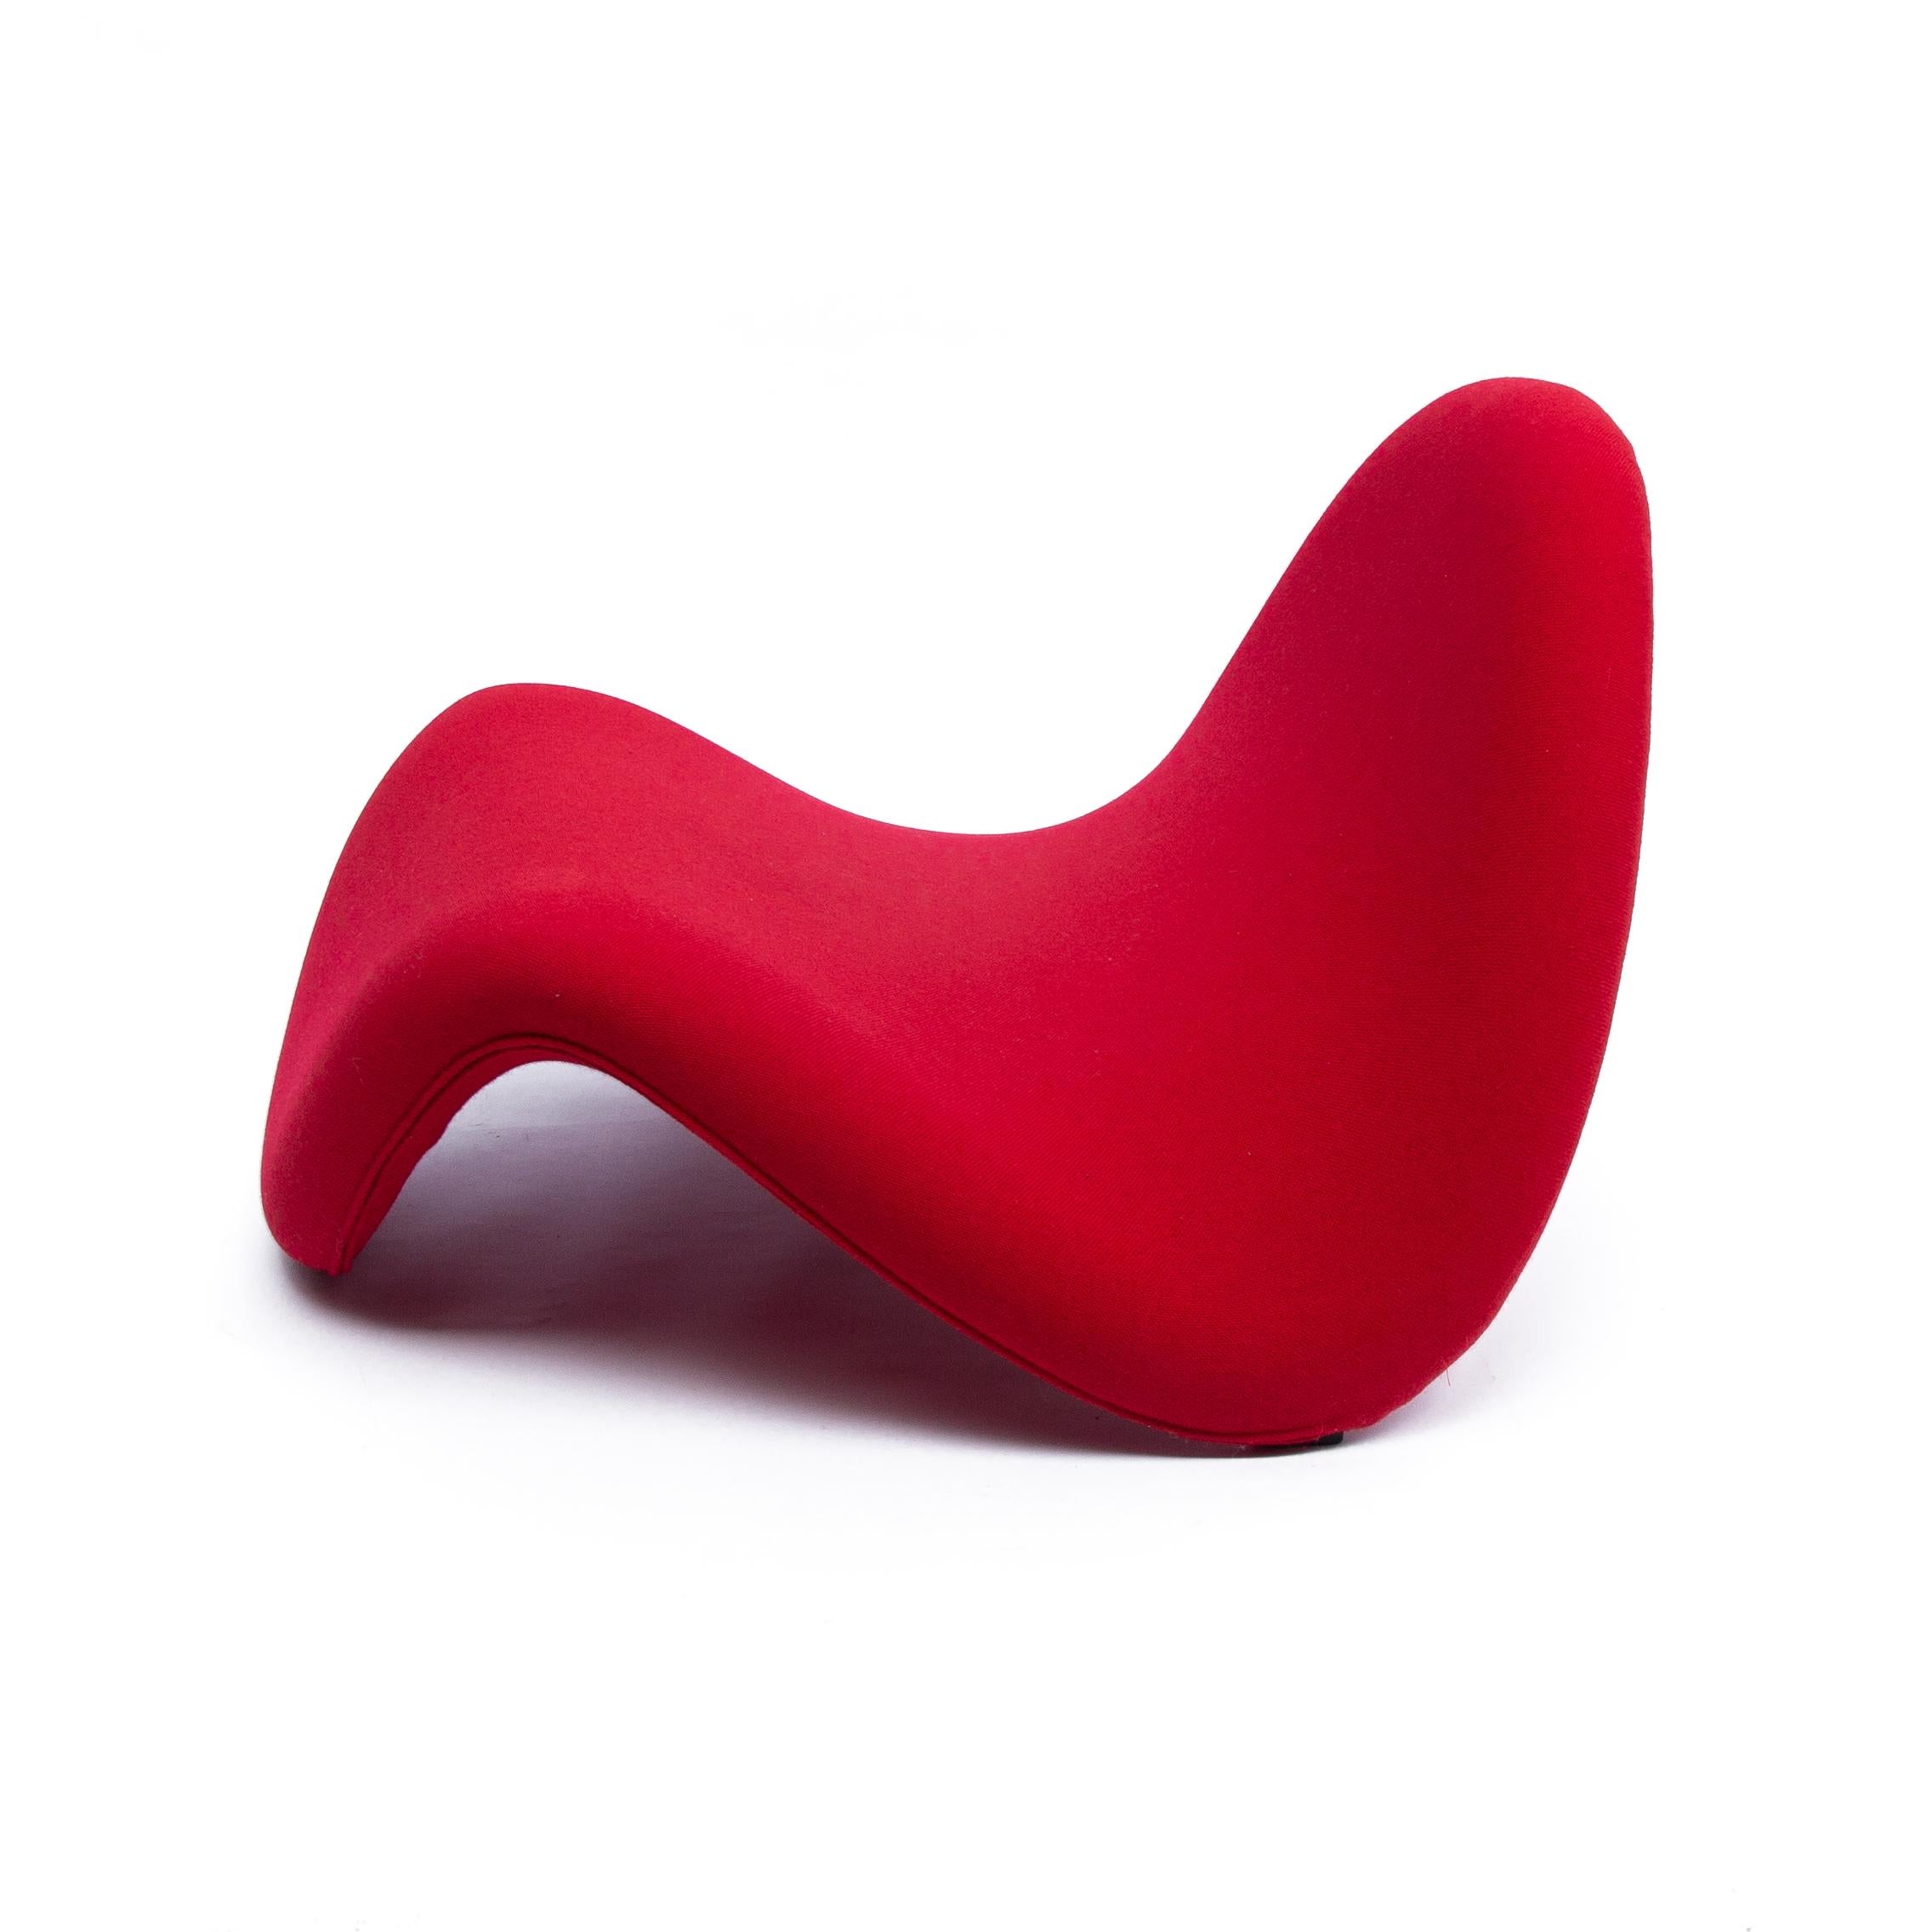 The Artifort Tongue is a beautiful sculptural armchair. The Tongue Chair was designed by Pierre Paulin for Artifort in 1967. It is one of the essential classics in modern furniture history. The Tongue is a clear expressive and almost nonchalant